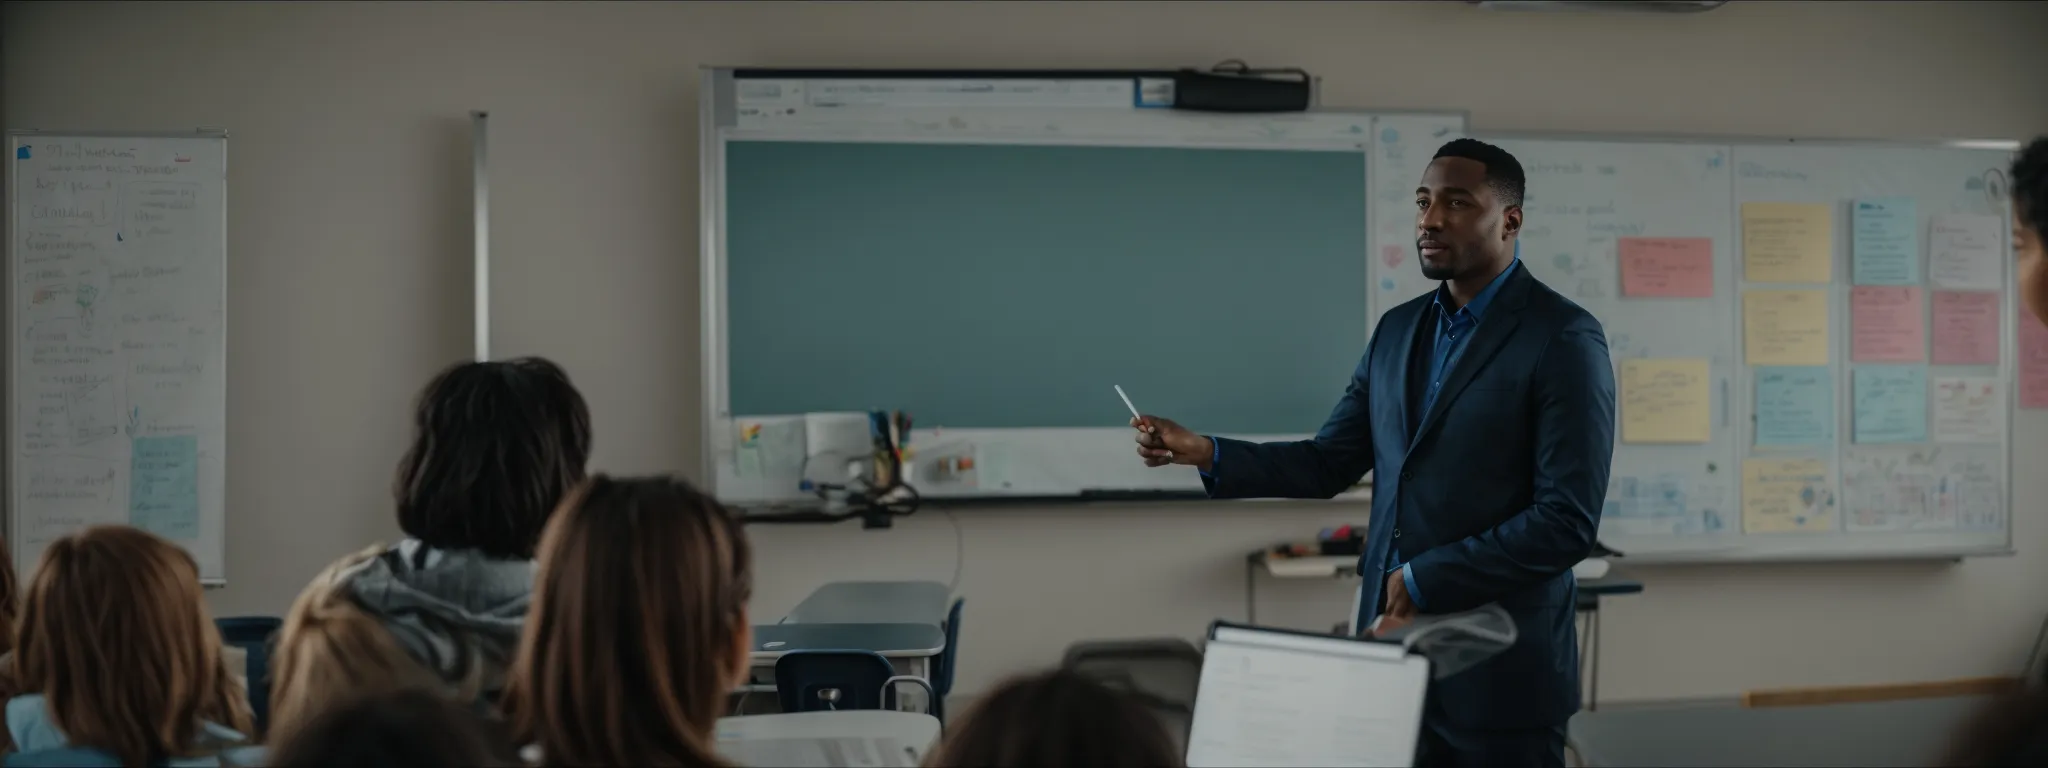 a teacher at a whiteboard presenting to a classroom equipped with laptops open to survey interfaces.